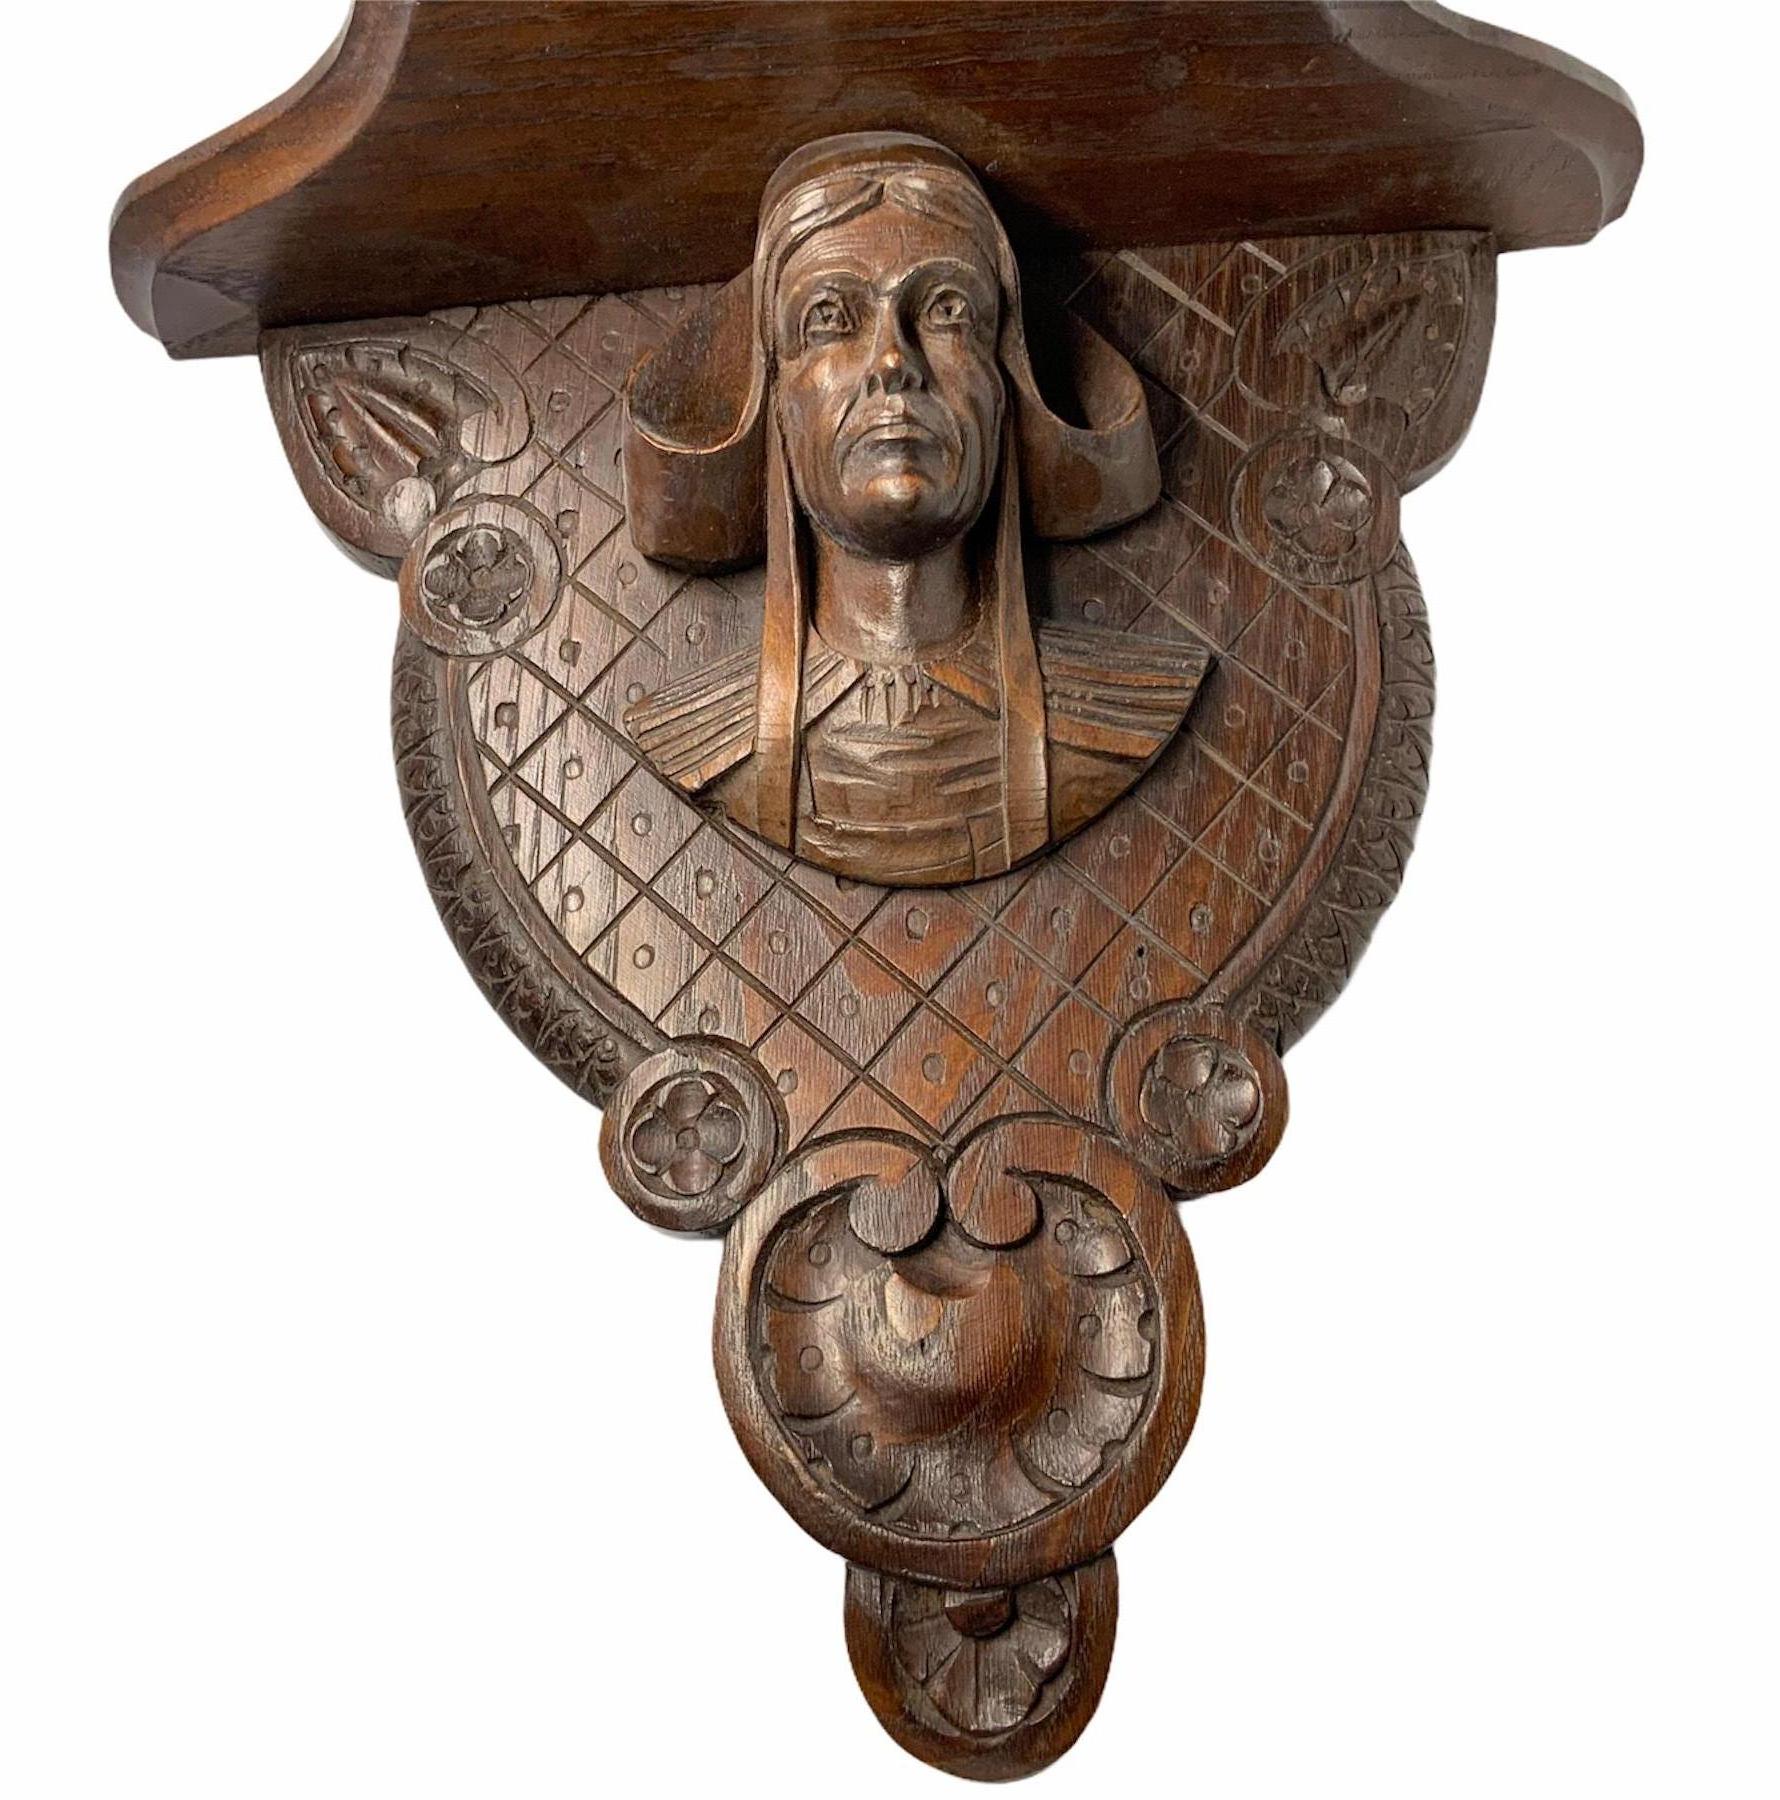 This is a wall bracket-shelf depicting a very detailed carved bust of what appear to be a scholar with medieval headwear. The wrinkles in the frontal head, the facial expressions lines and the deep gaze are noticeable. He is wearing a hat and